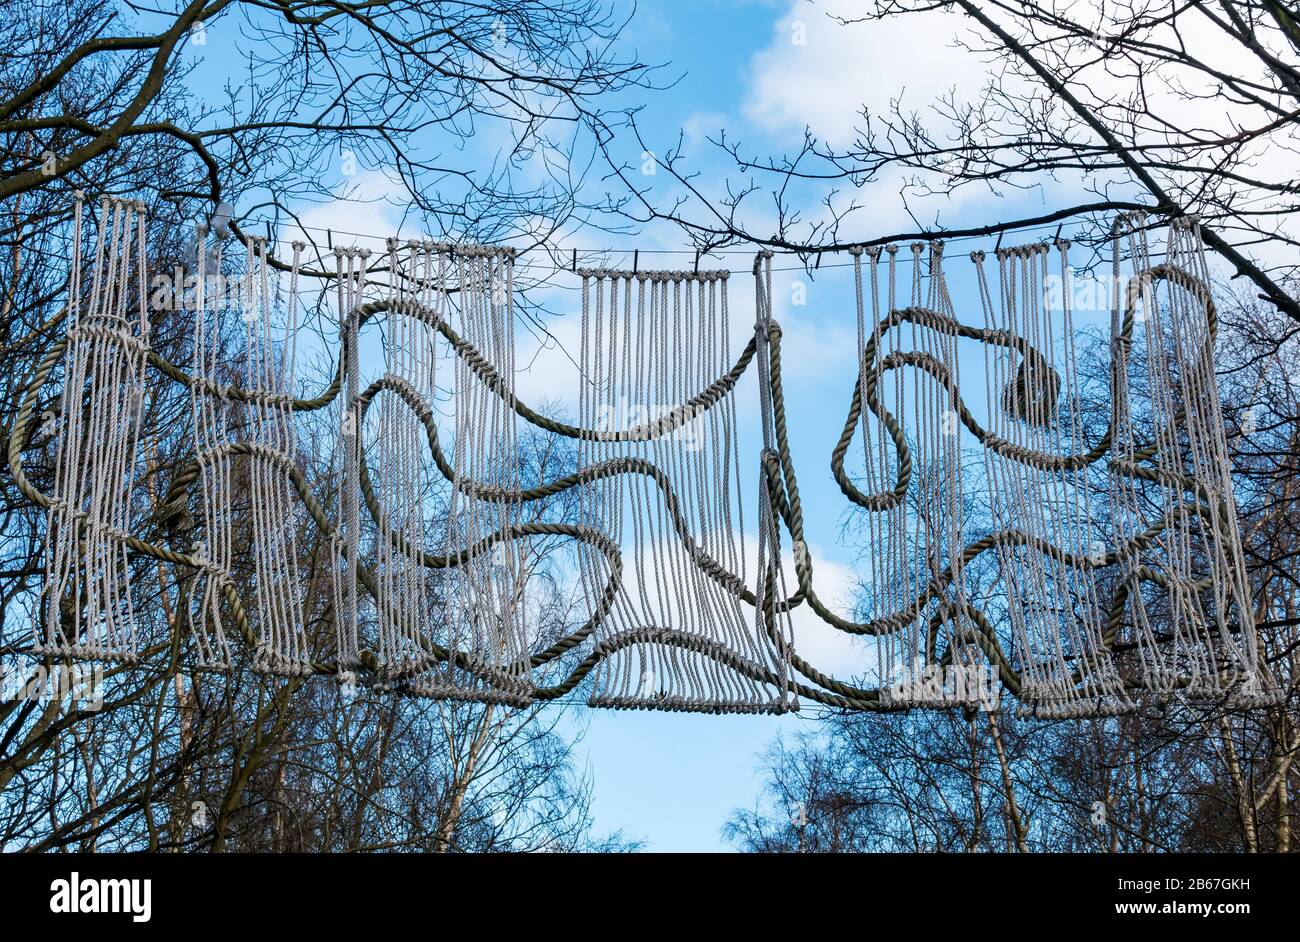 String, cord and rope hanging sculpture artwork by sculptor Lucy Wayman, part of Edinburgh Art Festival 2019 above cycle path, Edinburgh, Scotland, UK Stock Photo